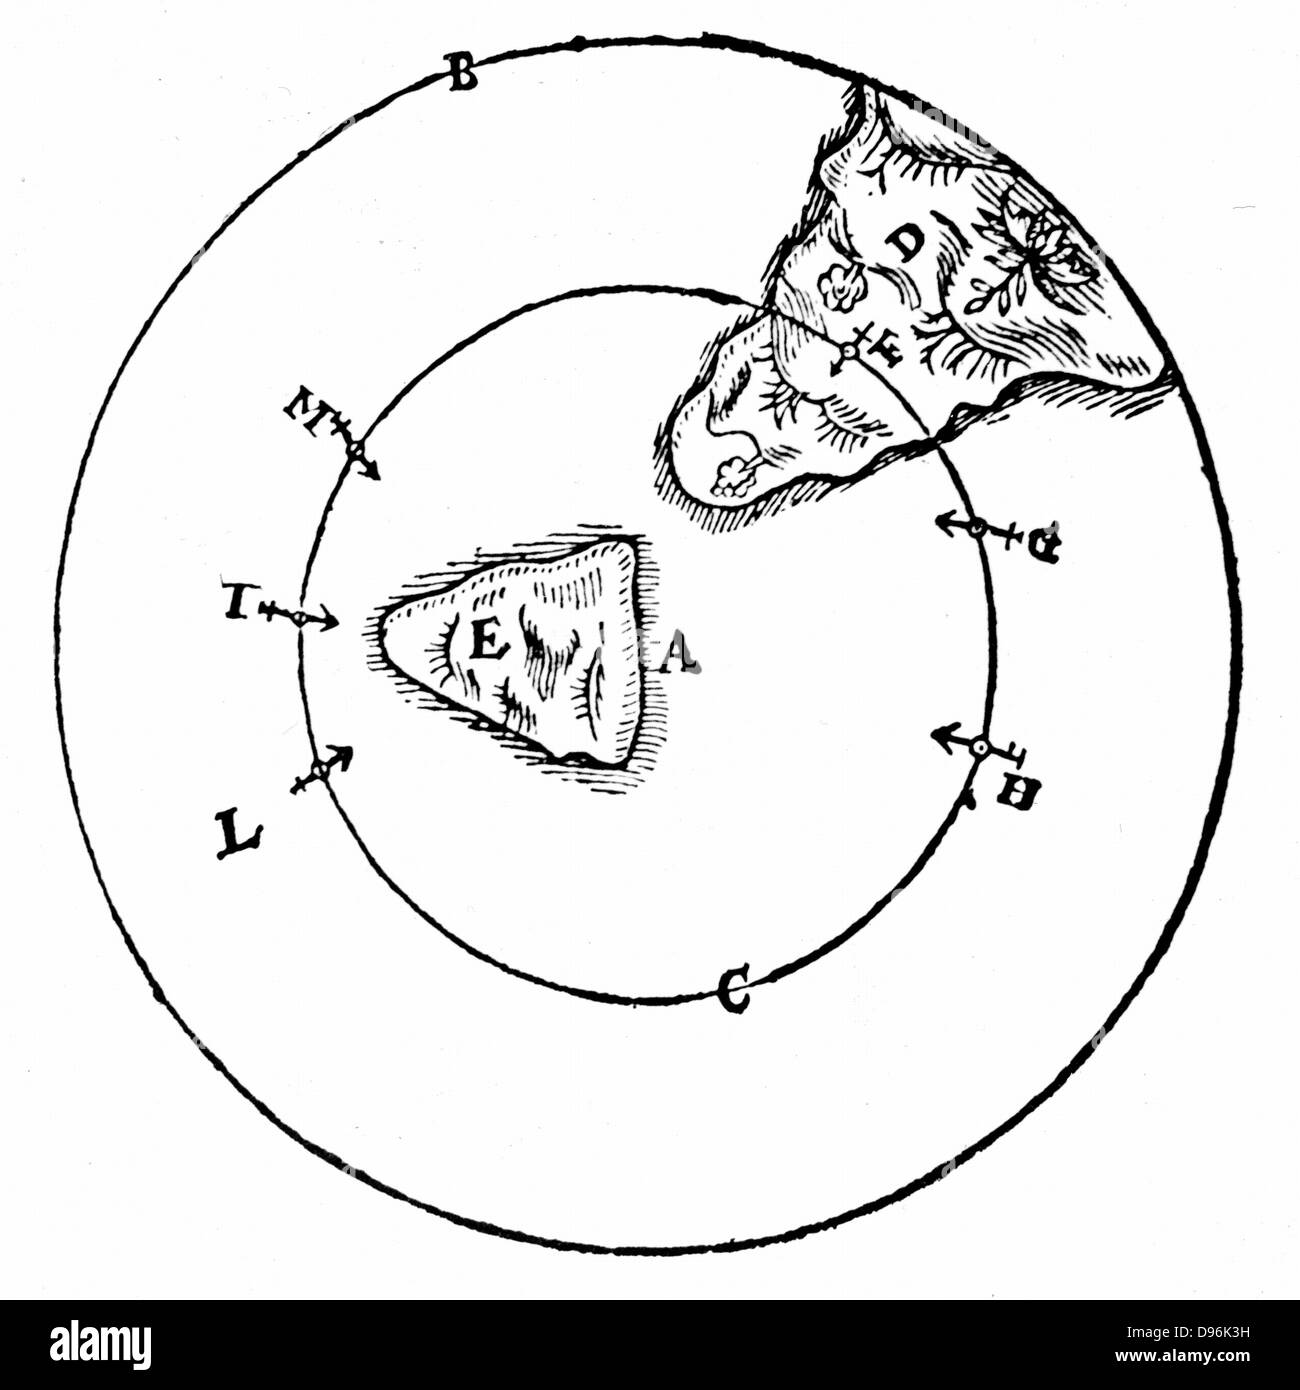 Diagram to illustrate the behaviour of a magnet at different positions around the north pole of the Earth (A). From William Gilbert 'De Magnete', London, 1600 Stock Photo